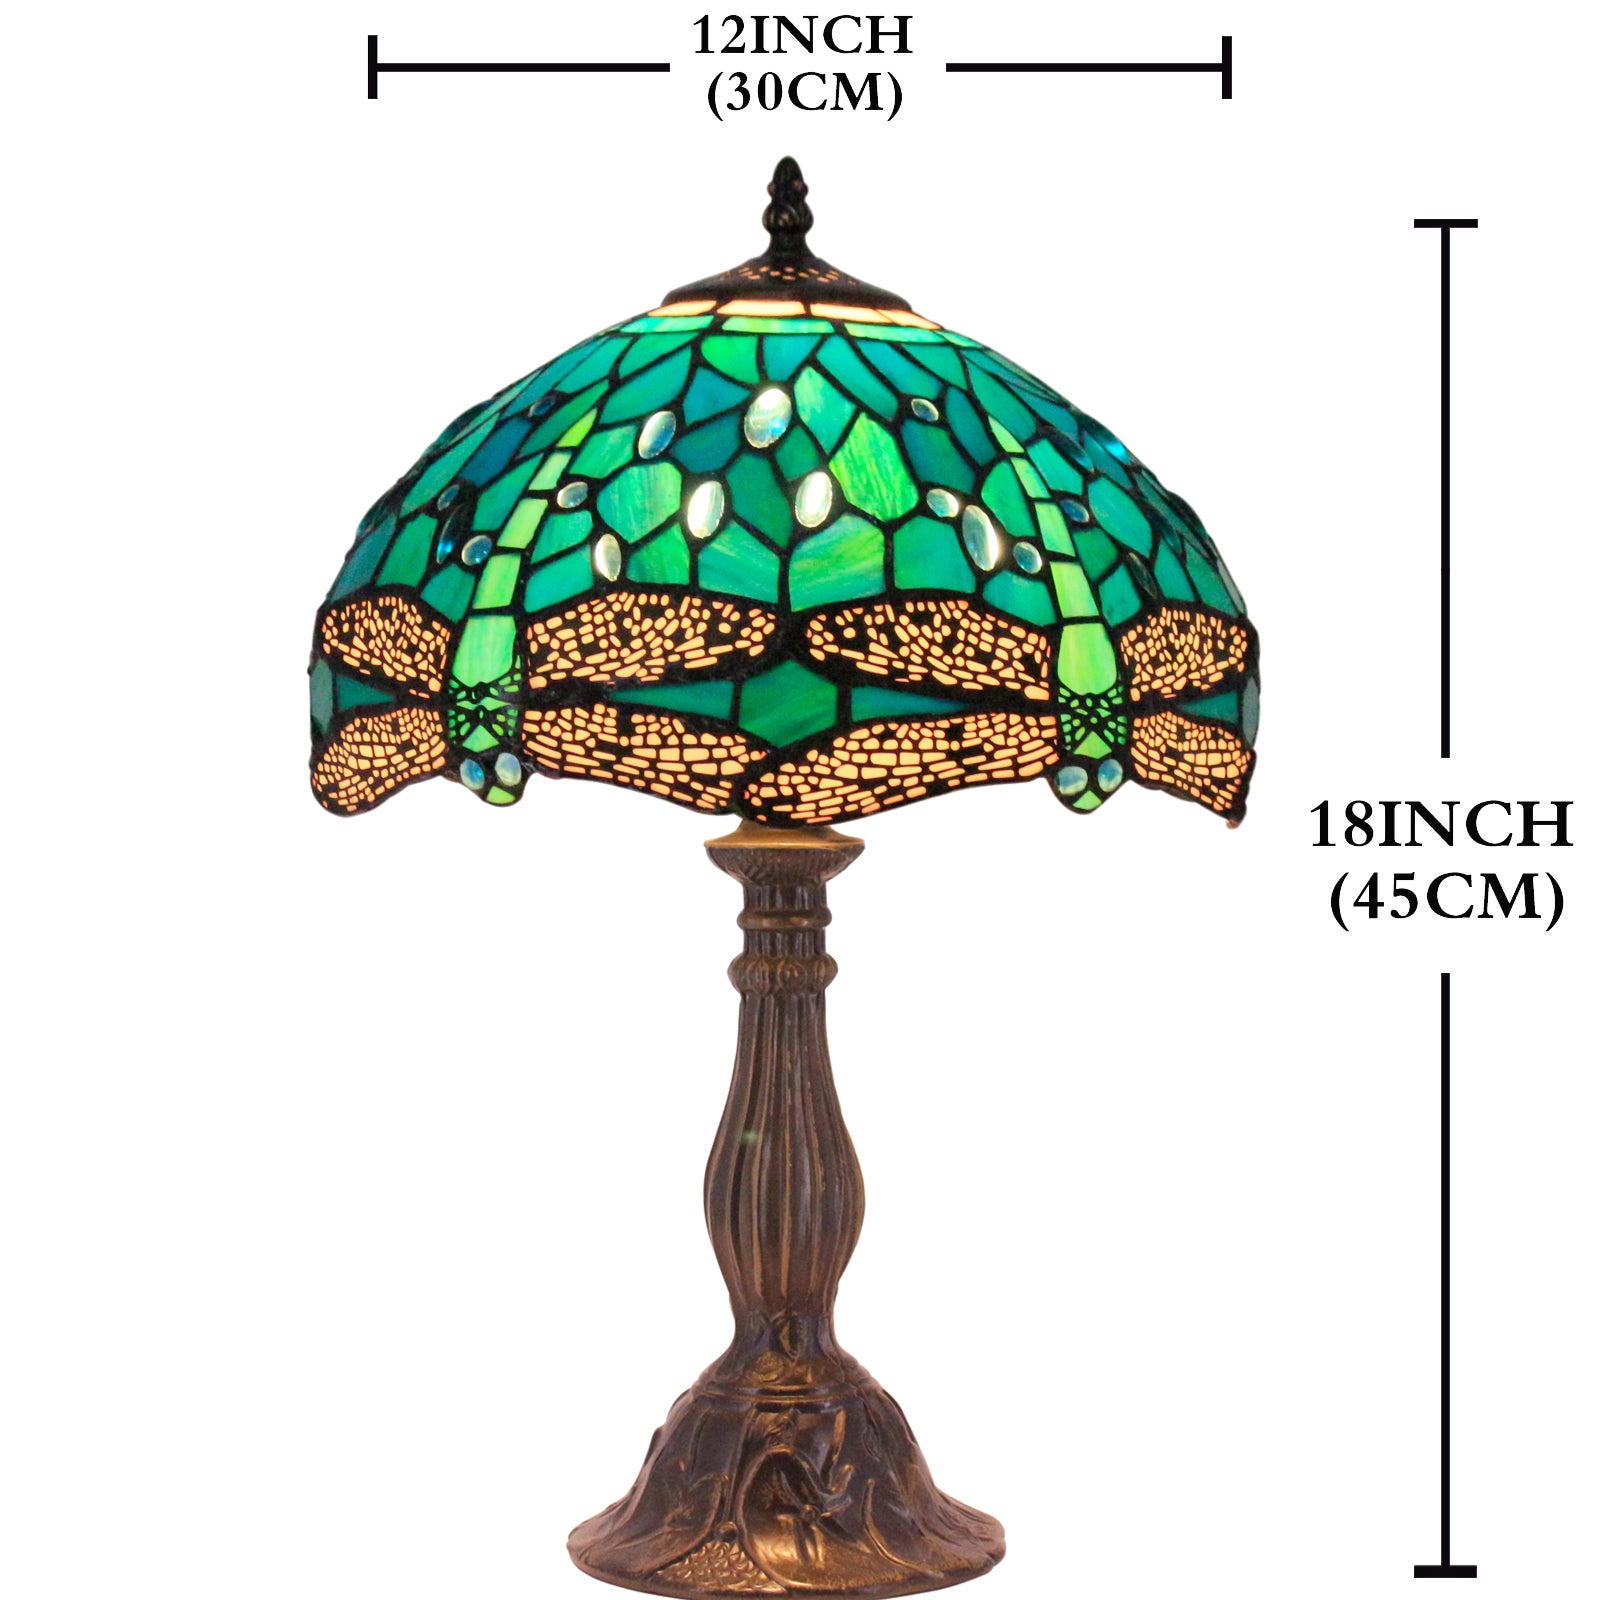 Tiffany Lamp Werfactory® Green Blue Stained Glass Dragonfly Light